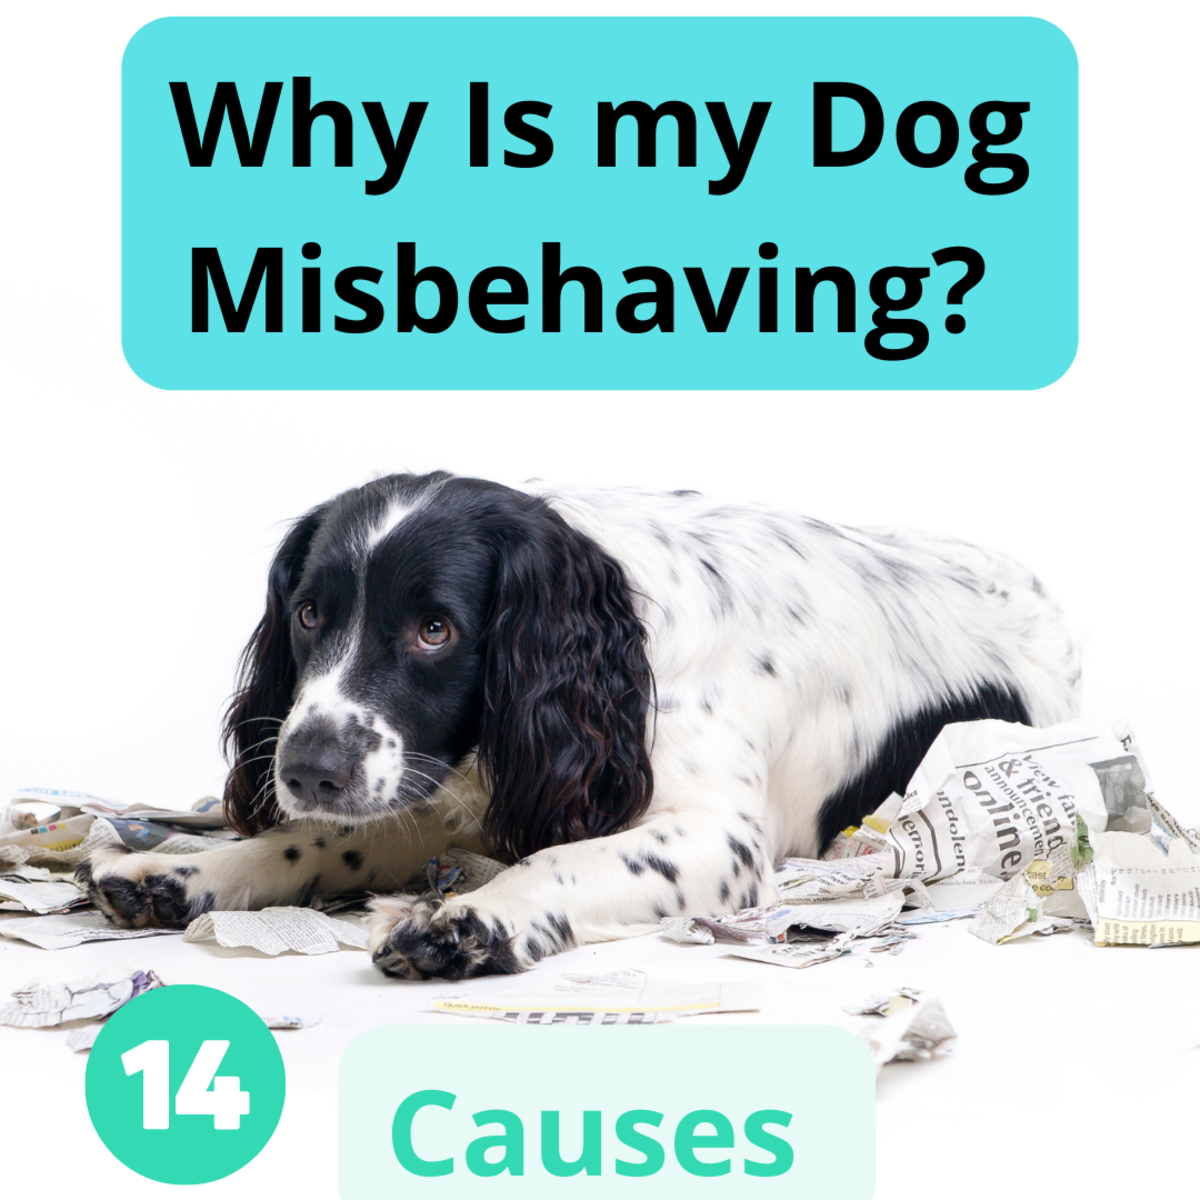 Why Is My Dog Misbehaving? 14 Potential Causes